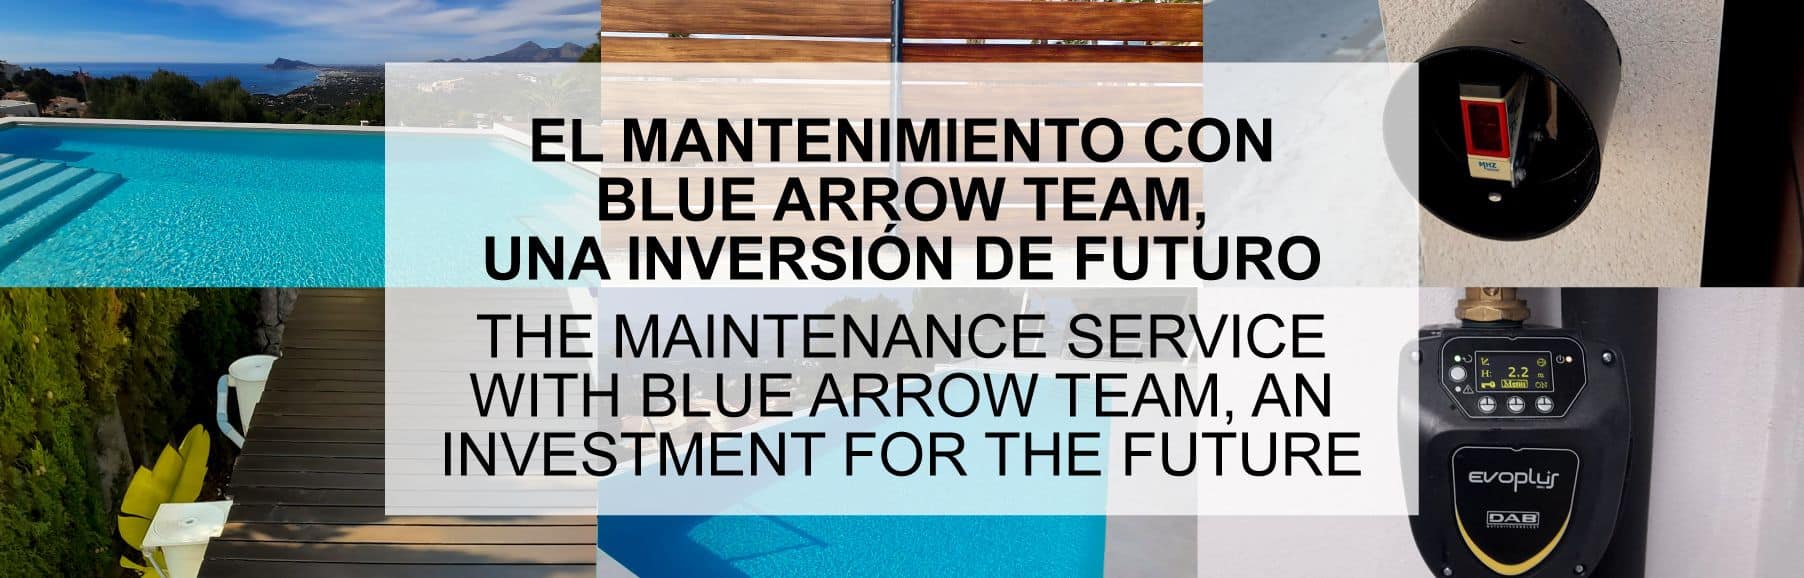 The maintenance service with Blue Arrow Team, an investment for the future